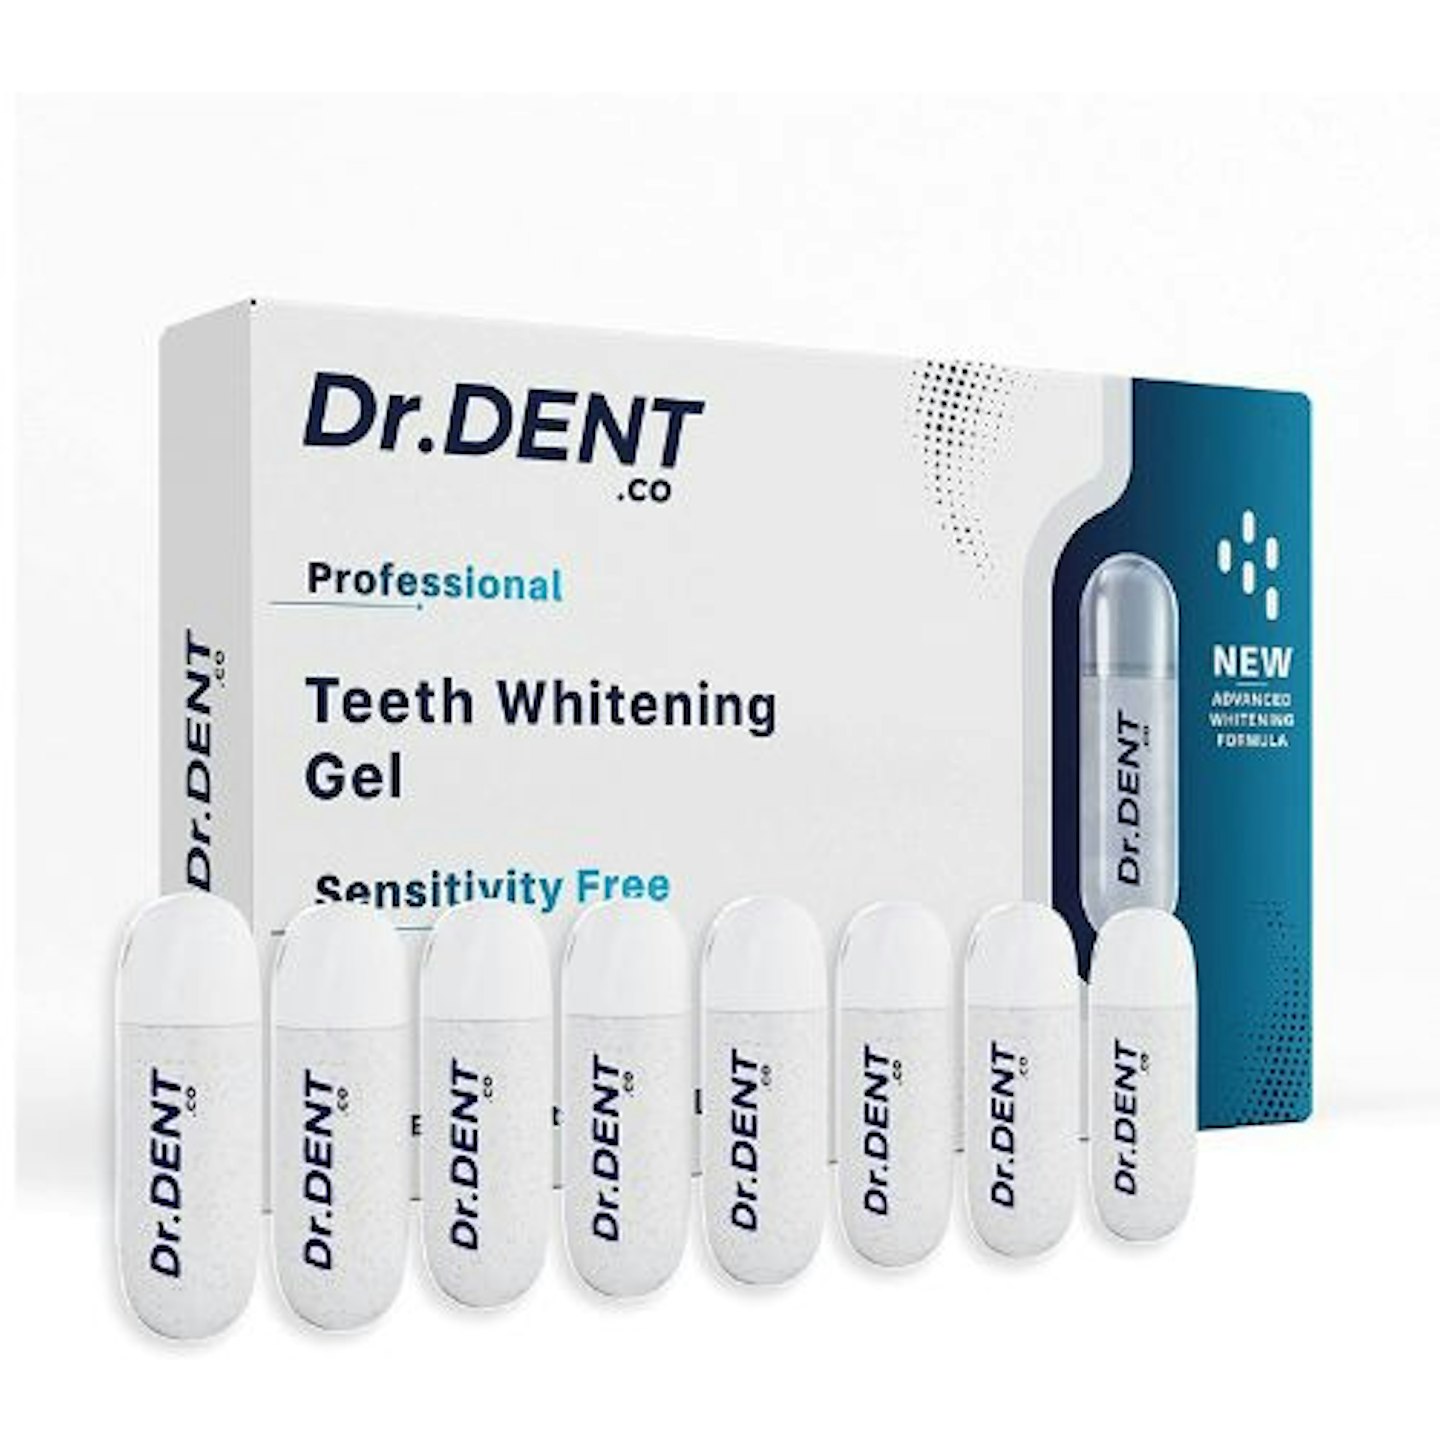 DrDent Professional 8 Teeth Whitening Gel Pods